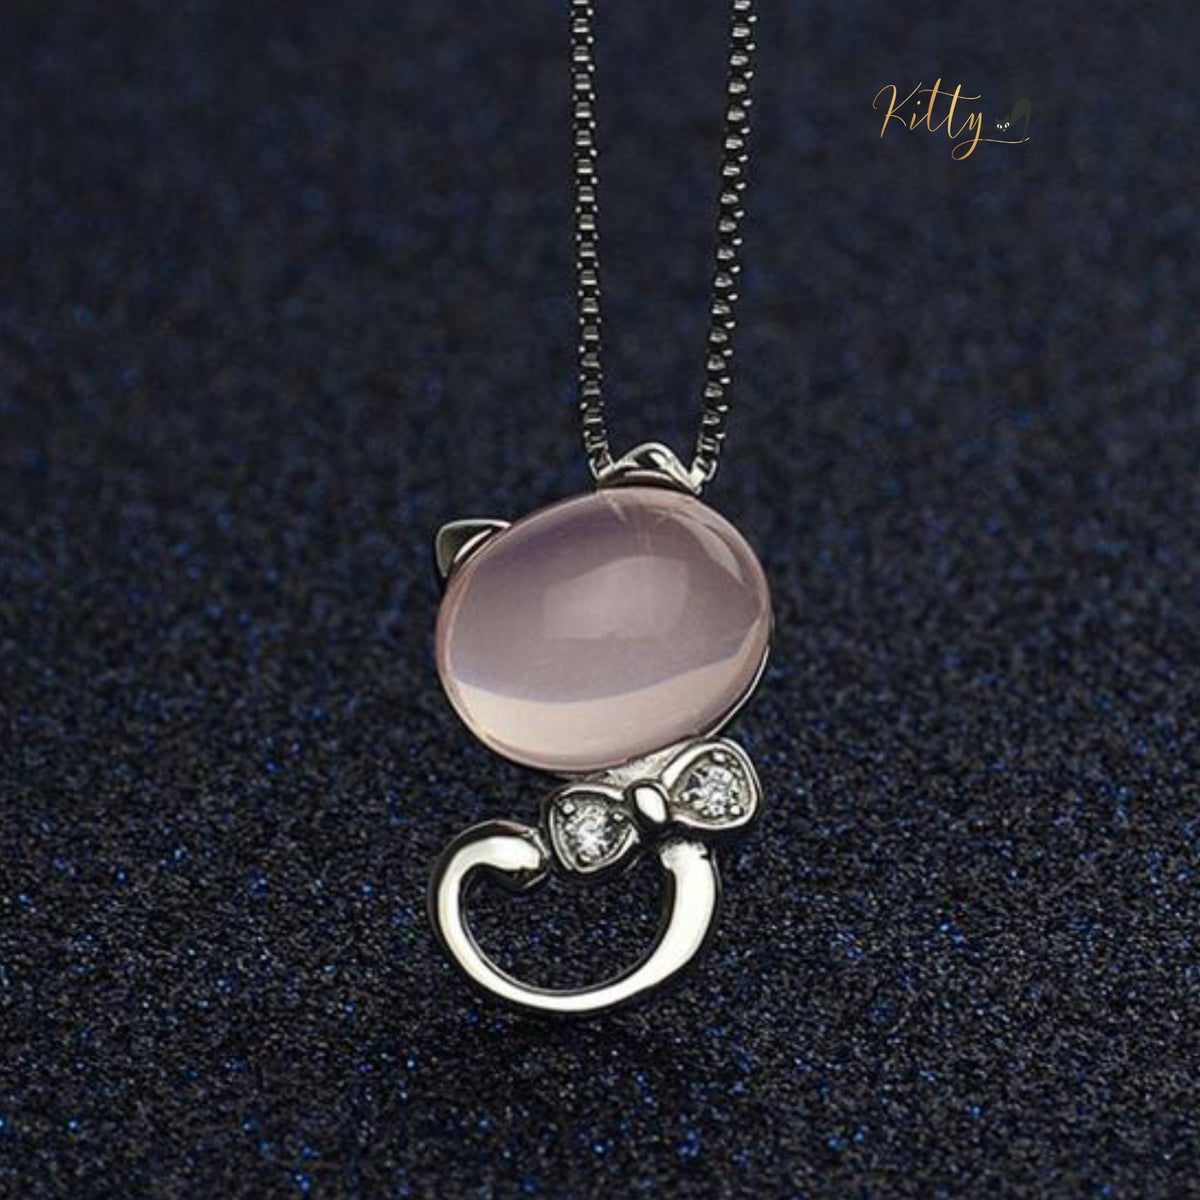 www.KittySensations.com Delicate Tea Pink Crystal Cat Pendant Necklace in Solid 925 Sterling Silver ($22.47): https://www.kittysensations.com/products/delicate-tea-pink-cat-pendant-necklace-in-solid-925-sterling-silver